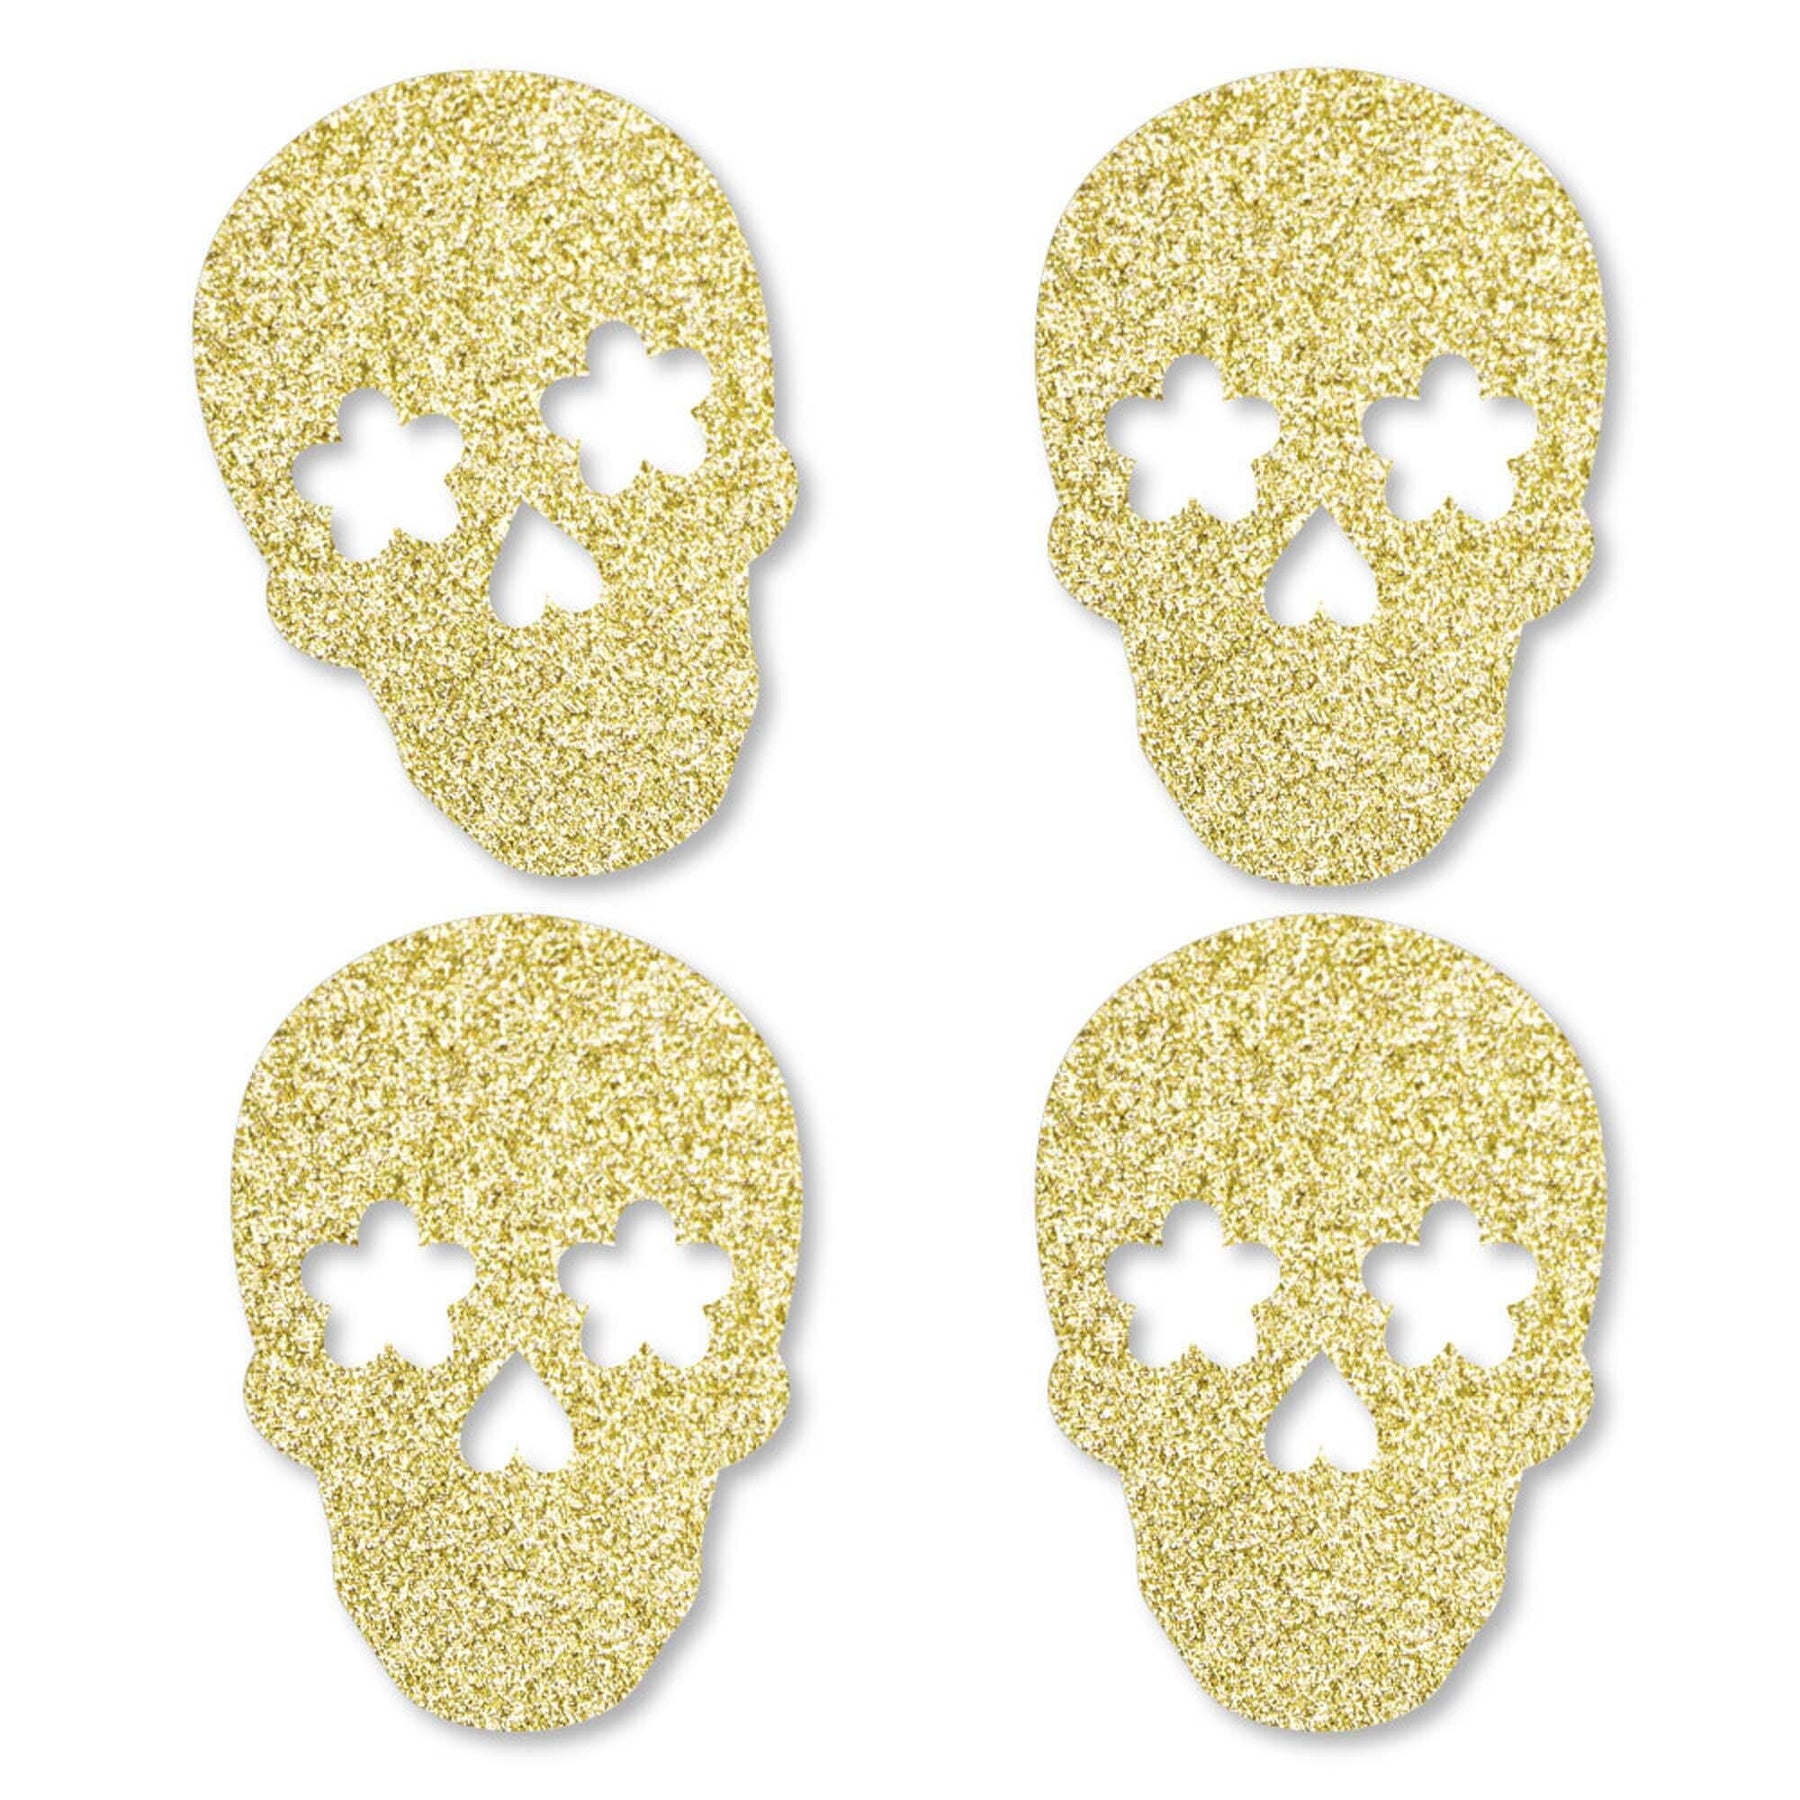 Gold Glitter Star - No-Mess Real Gold Glitter Cut-Outs - Party Confetti - Set of 24